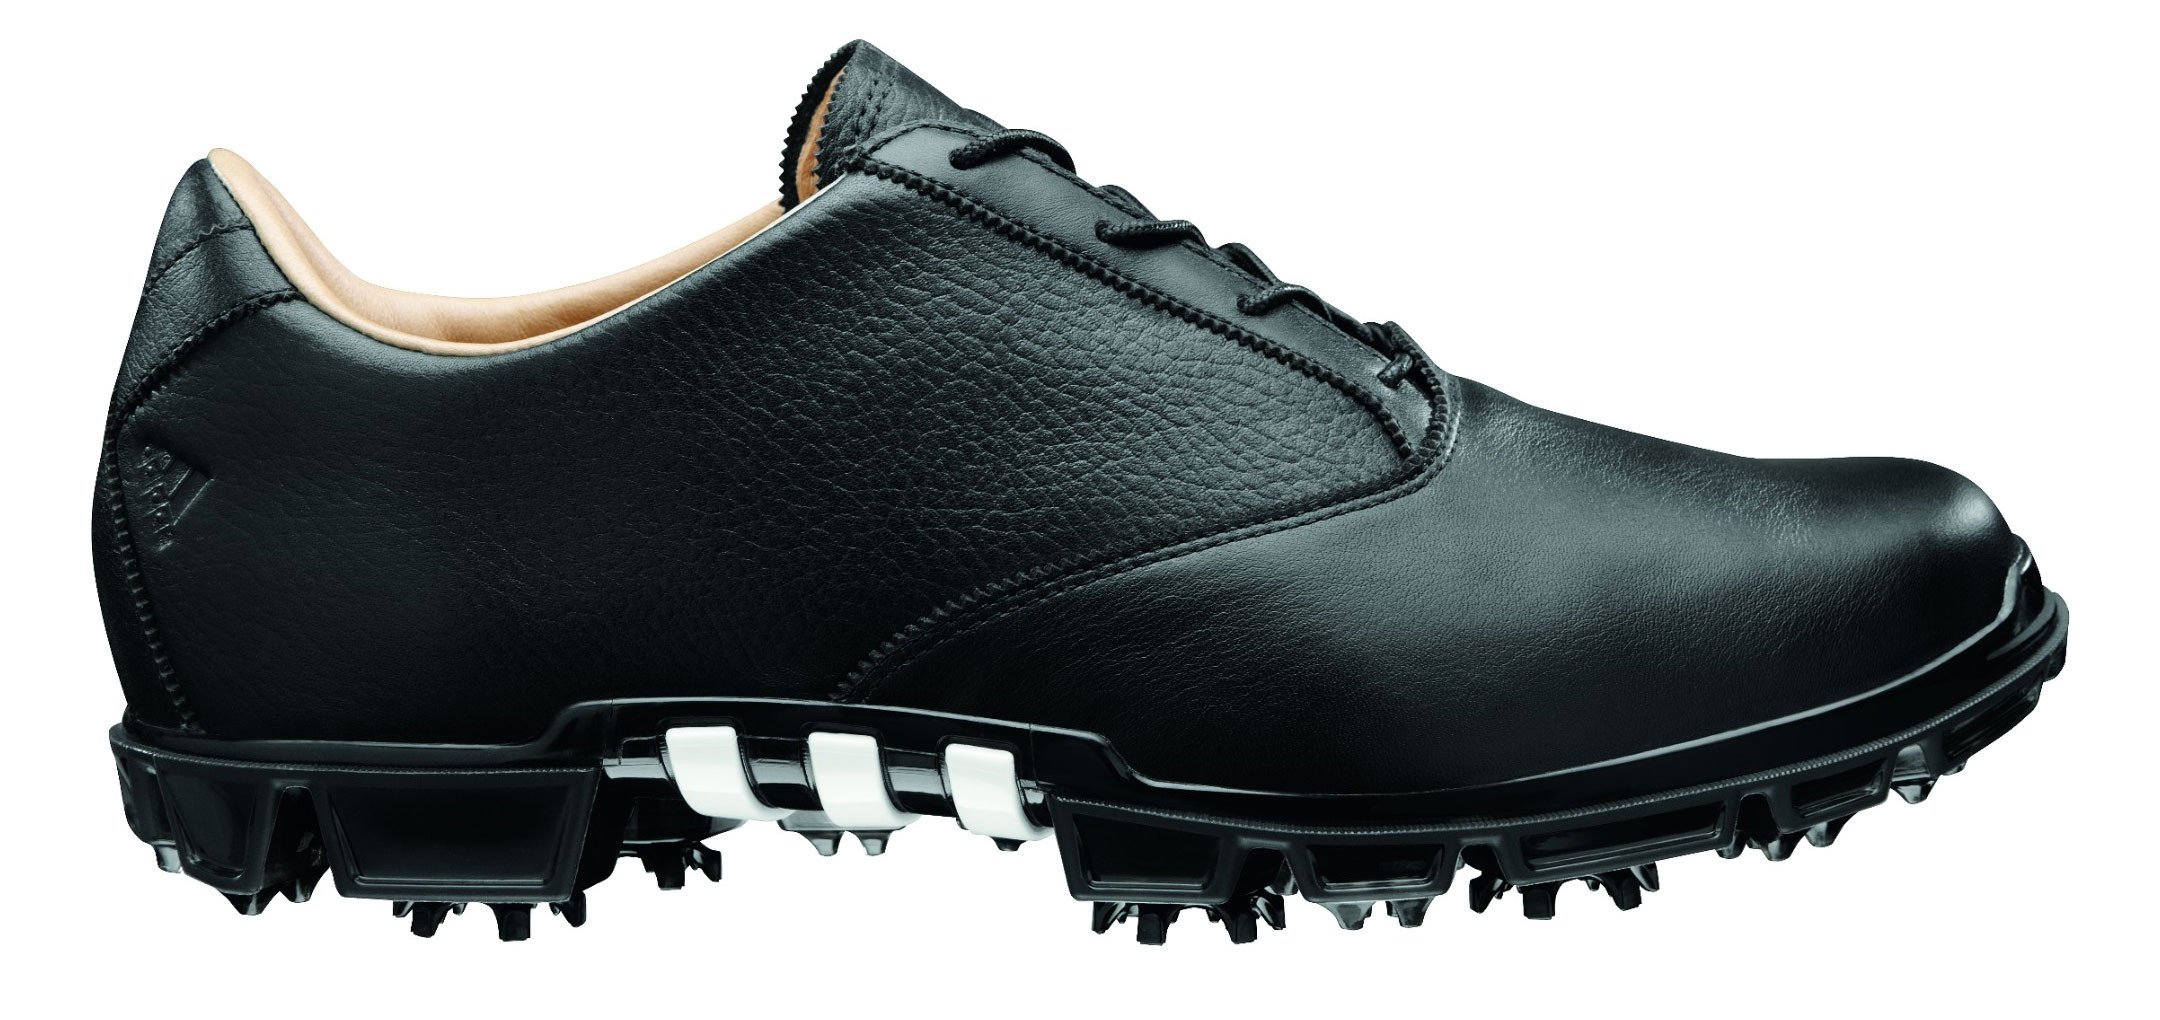 NEW Discount Adipure Motion Black Golf Shoes -